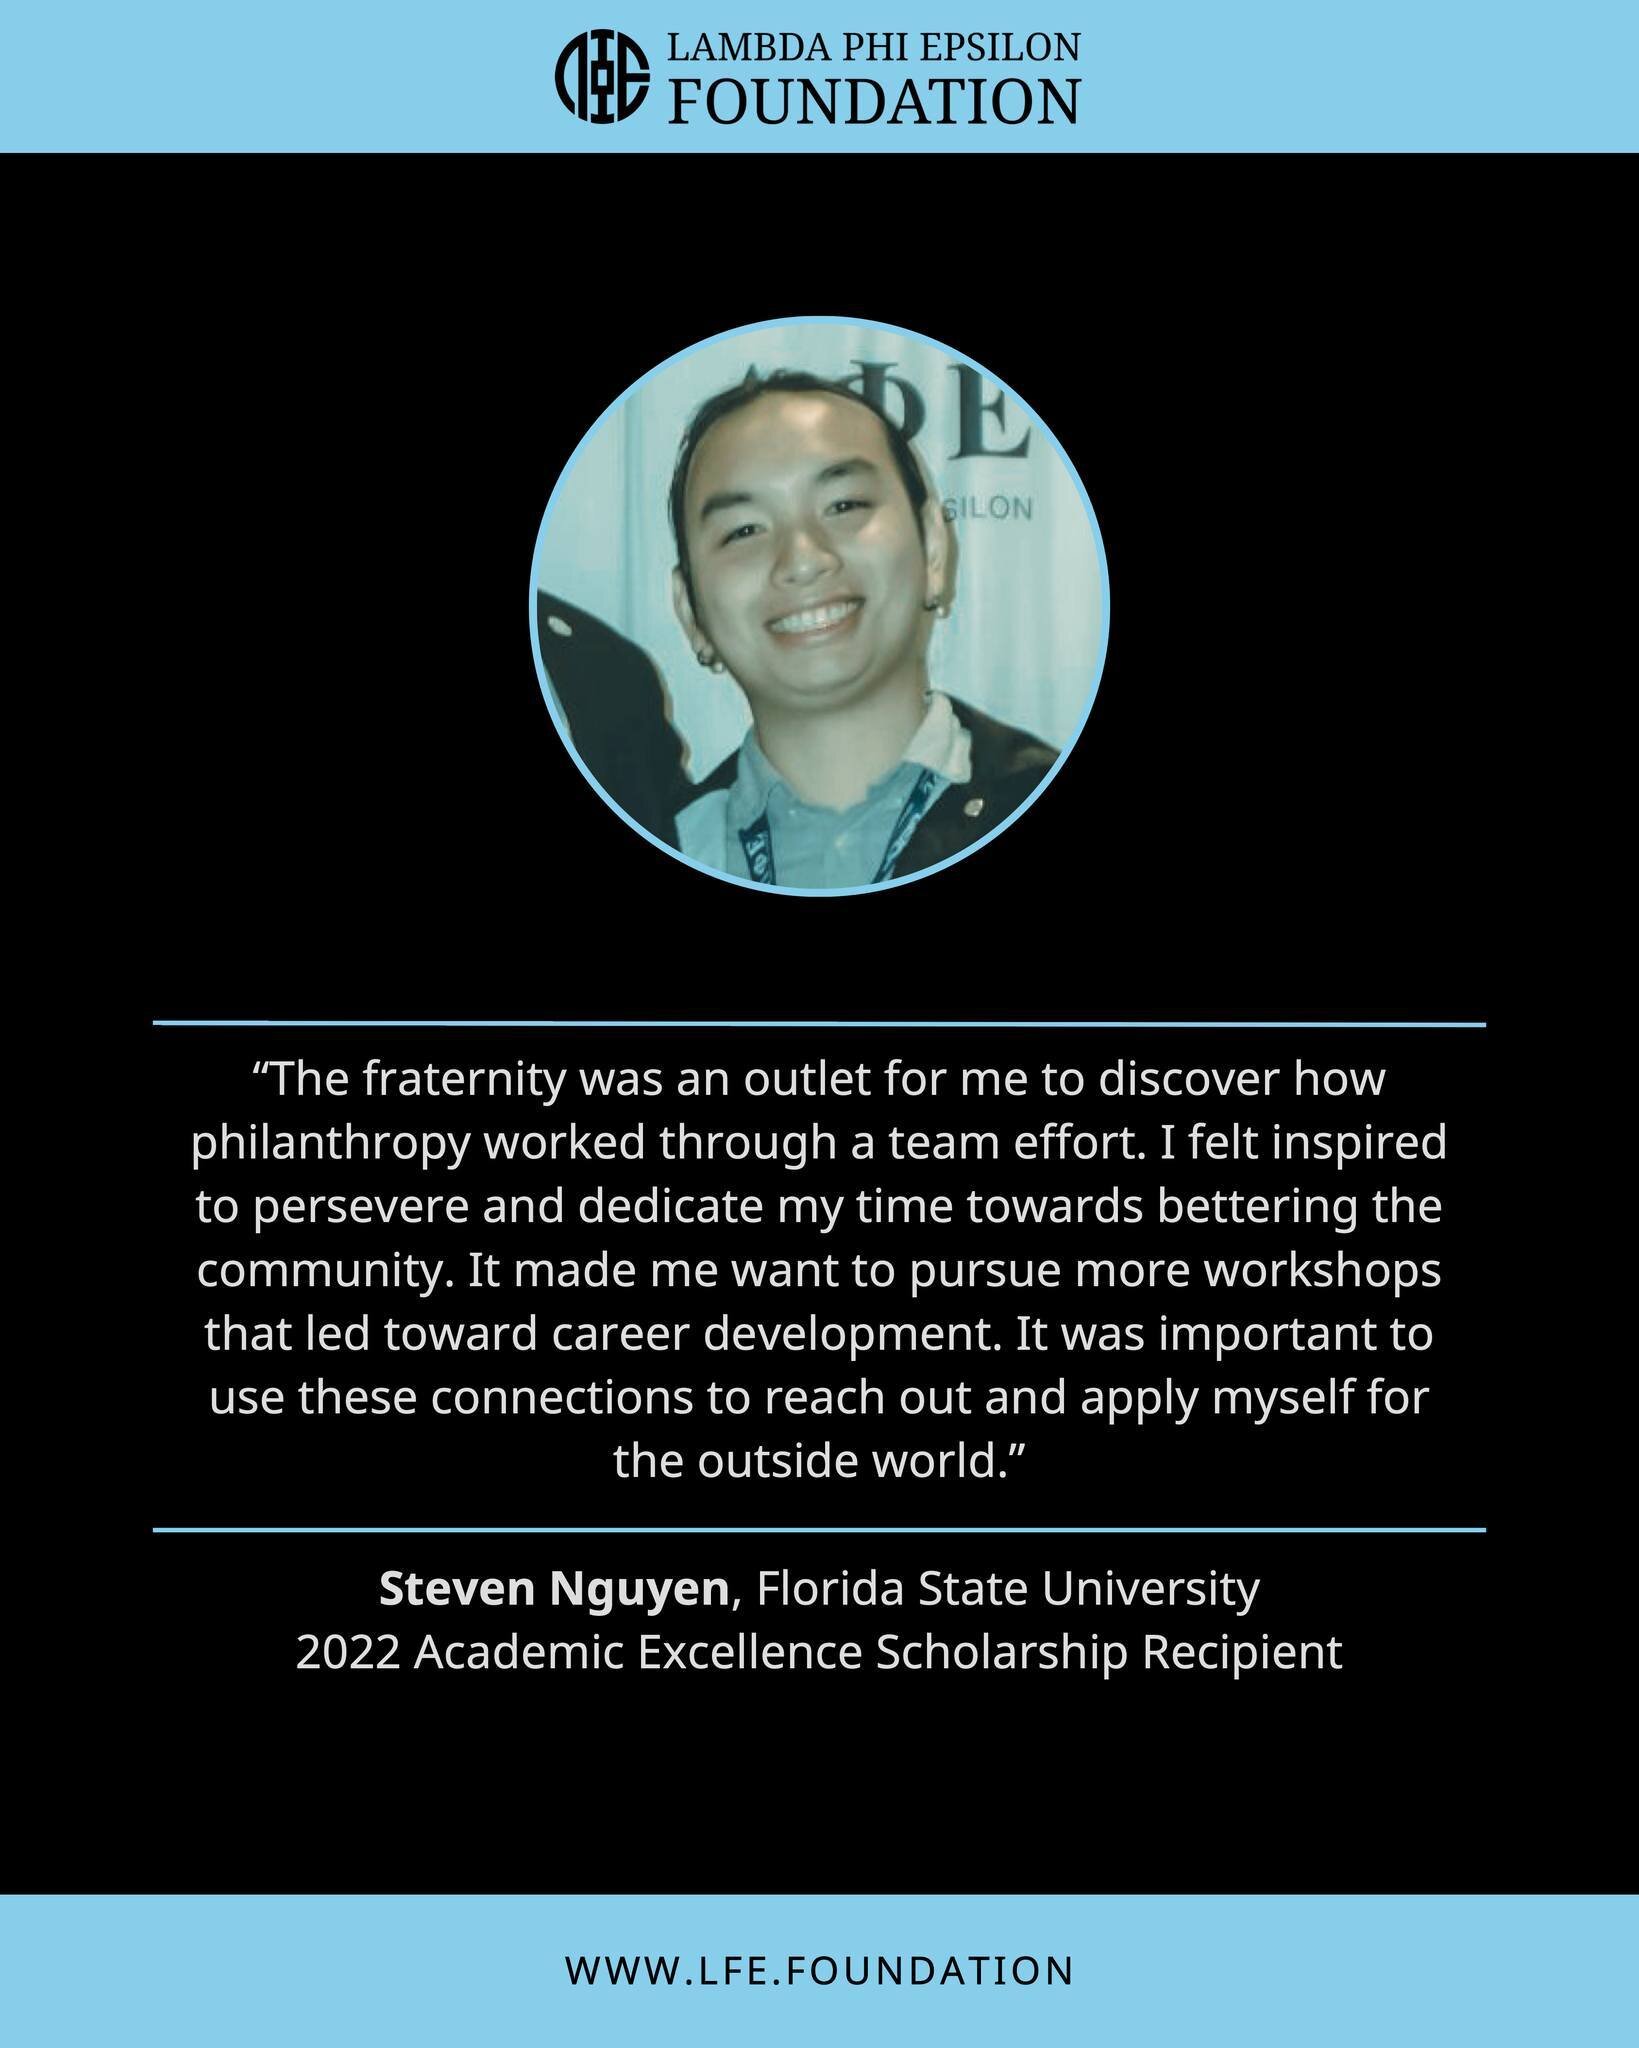 Our next scholar spotlight shines on Steven Nguyen from Florida State University, a recipient of the 2022 Academic Excellence Scholarship! According to Southeast Governor Joel Botardo, &quot;Since crossing into the Fraternity, he has exemplified trai